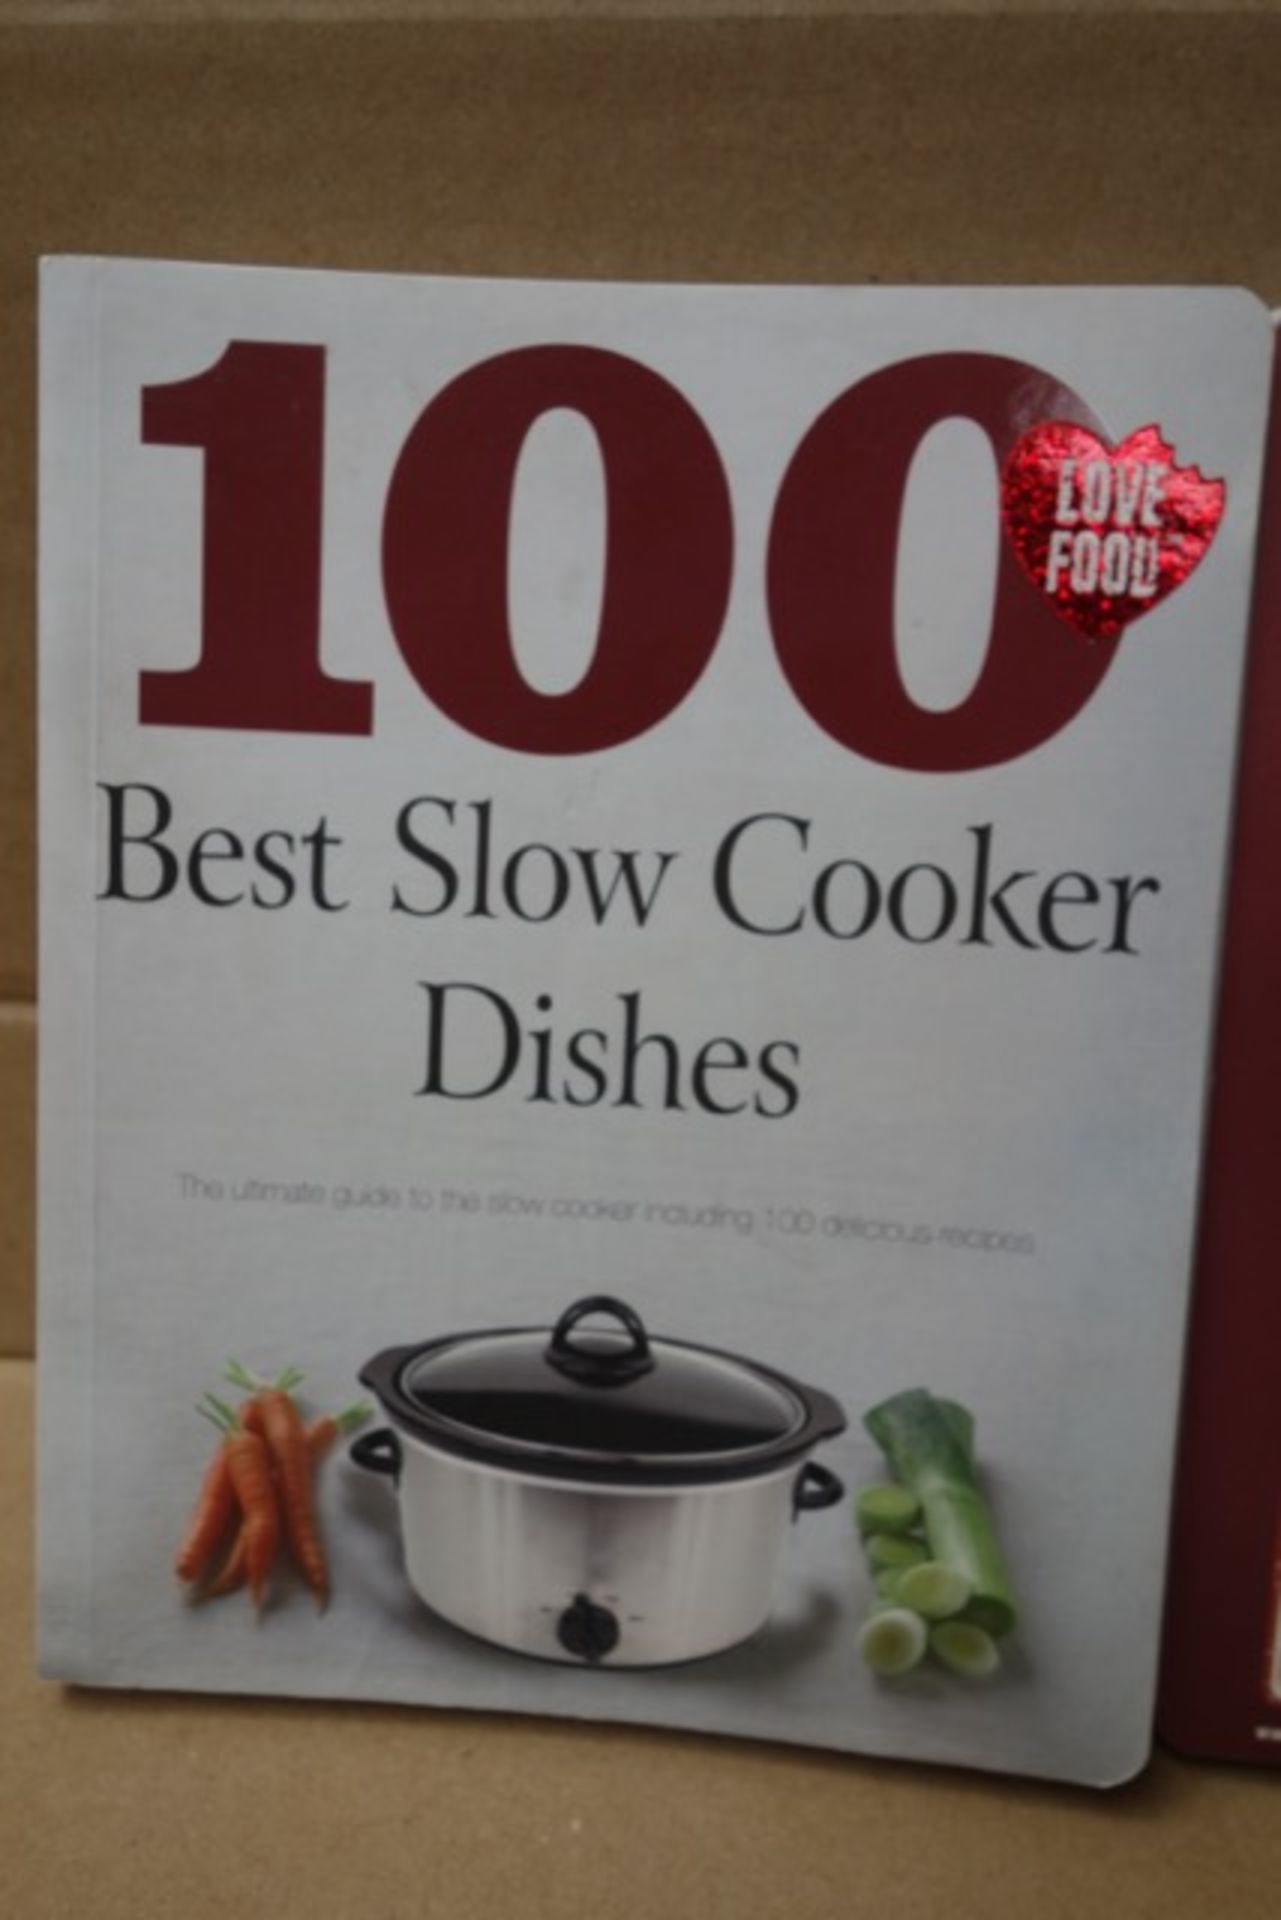 108 x Love Food 100 Best Slow Cooker Dishes. The ultimate guide to slow cooker including 100 - Image 2 of 3